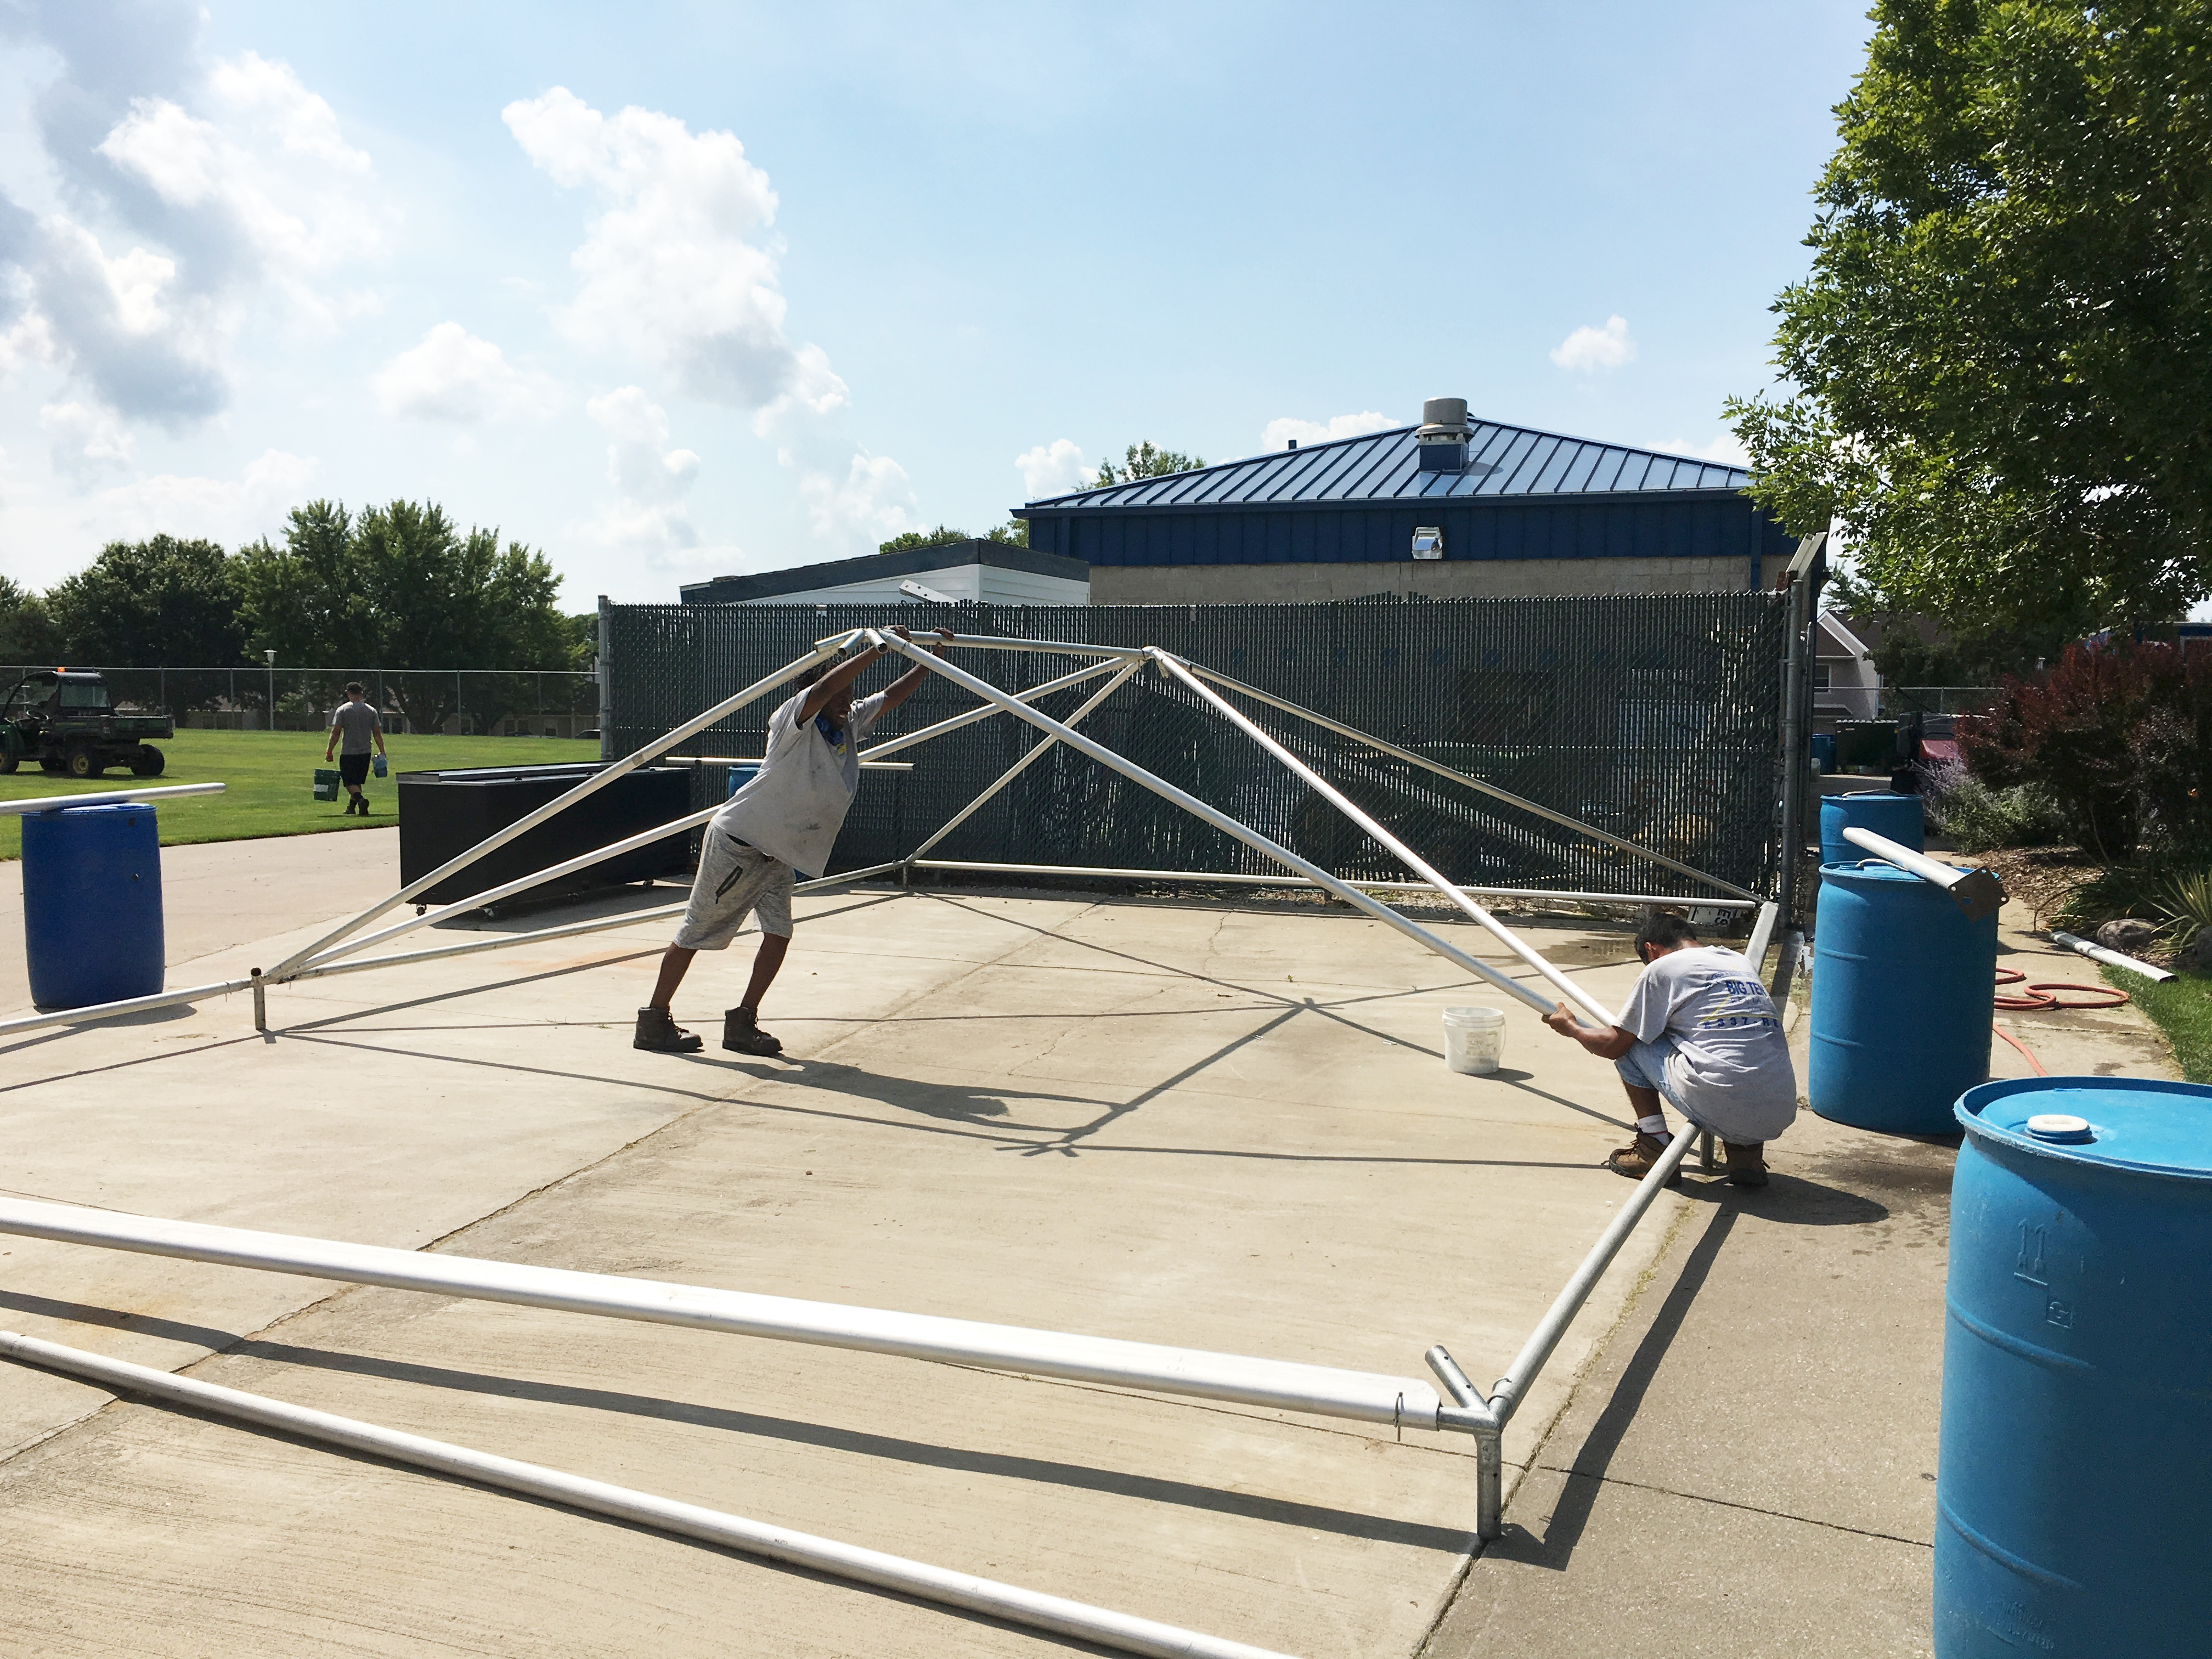 Putting the frame portion of a frame tent together at the Muscatine Soccer Complex